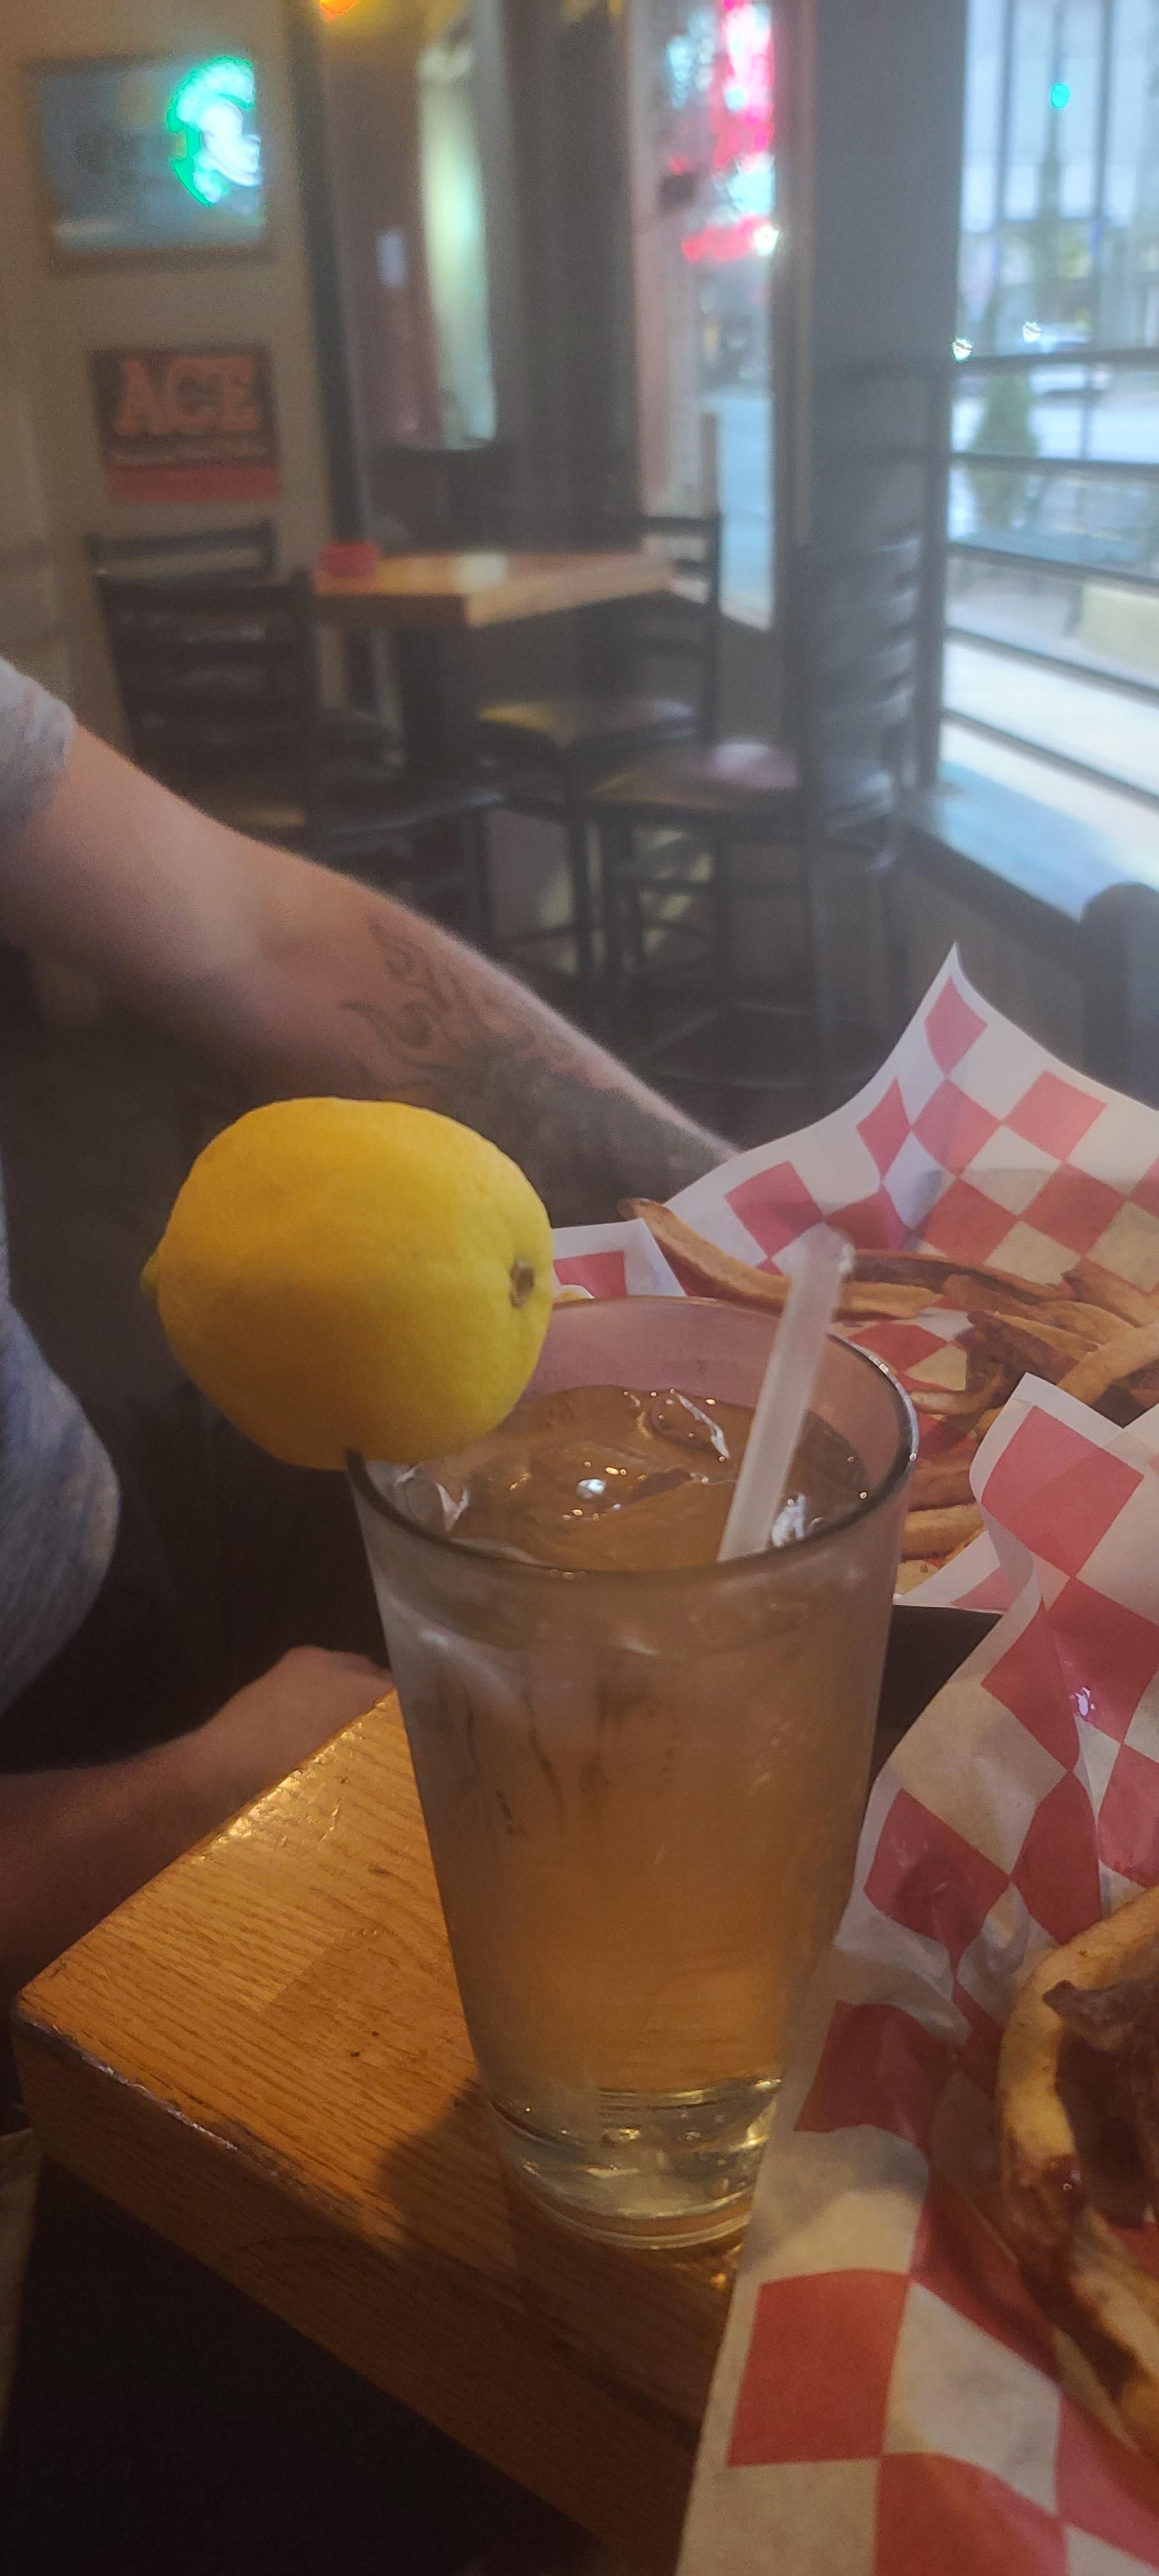 Asked for lemon with my water.